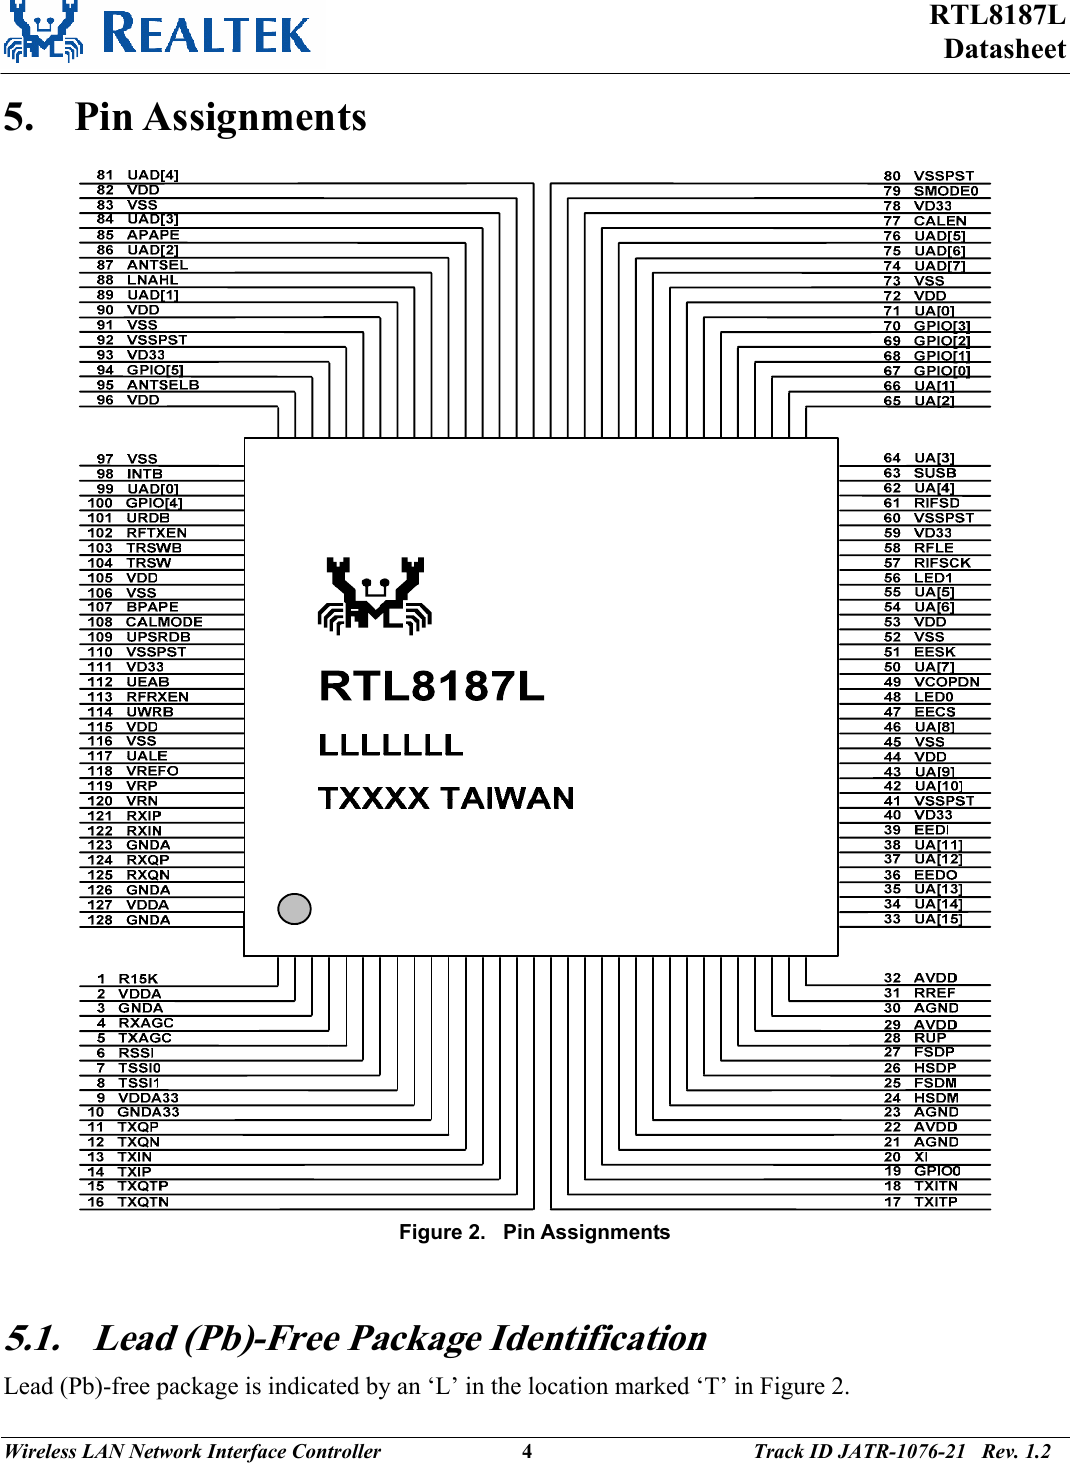 RTL8187L Datasheet Wireless LAN Network Interface Controller                           4                                          Track ID JATR-1076-21   Rev. 1.2  5. Pin Assignments  Figure 2.   Pin Assignments   5.1. Lead (Pb)-Free Package Identification Lead (Pb)-free package is indicated by an ‘L’ in the location marked ‘T’ in Figure 2.  